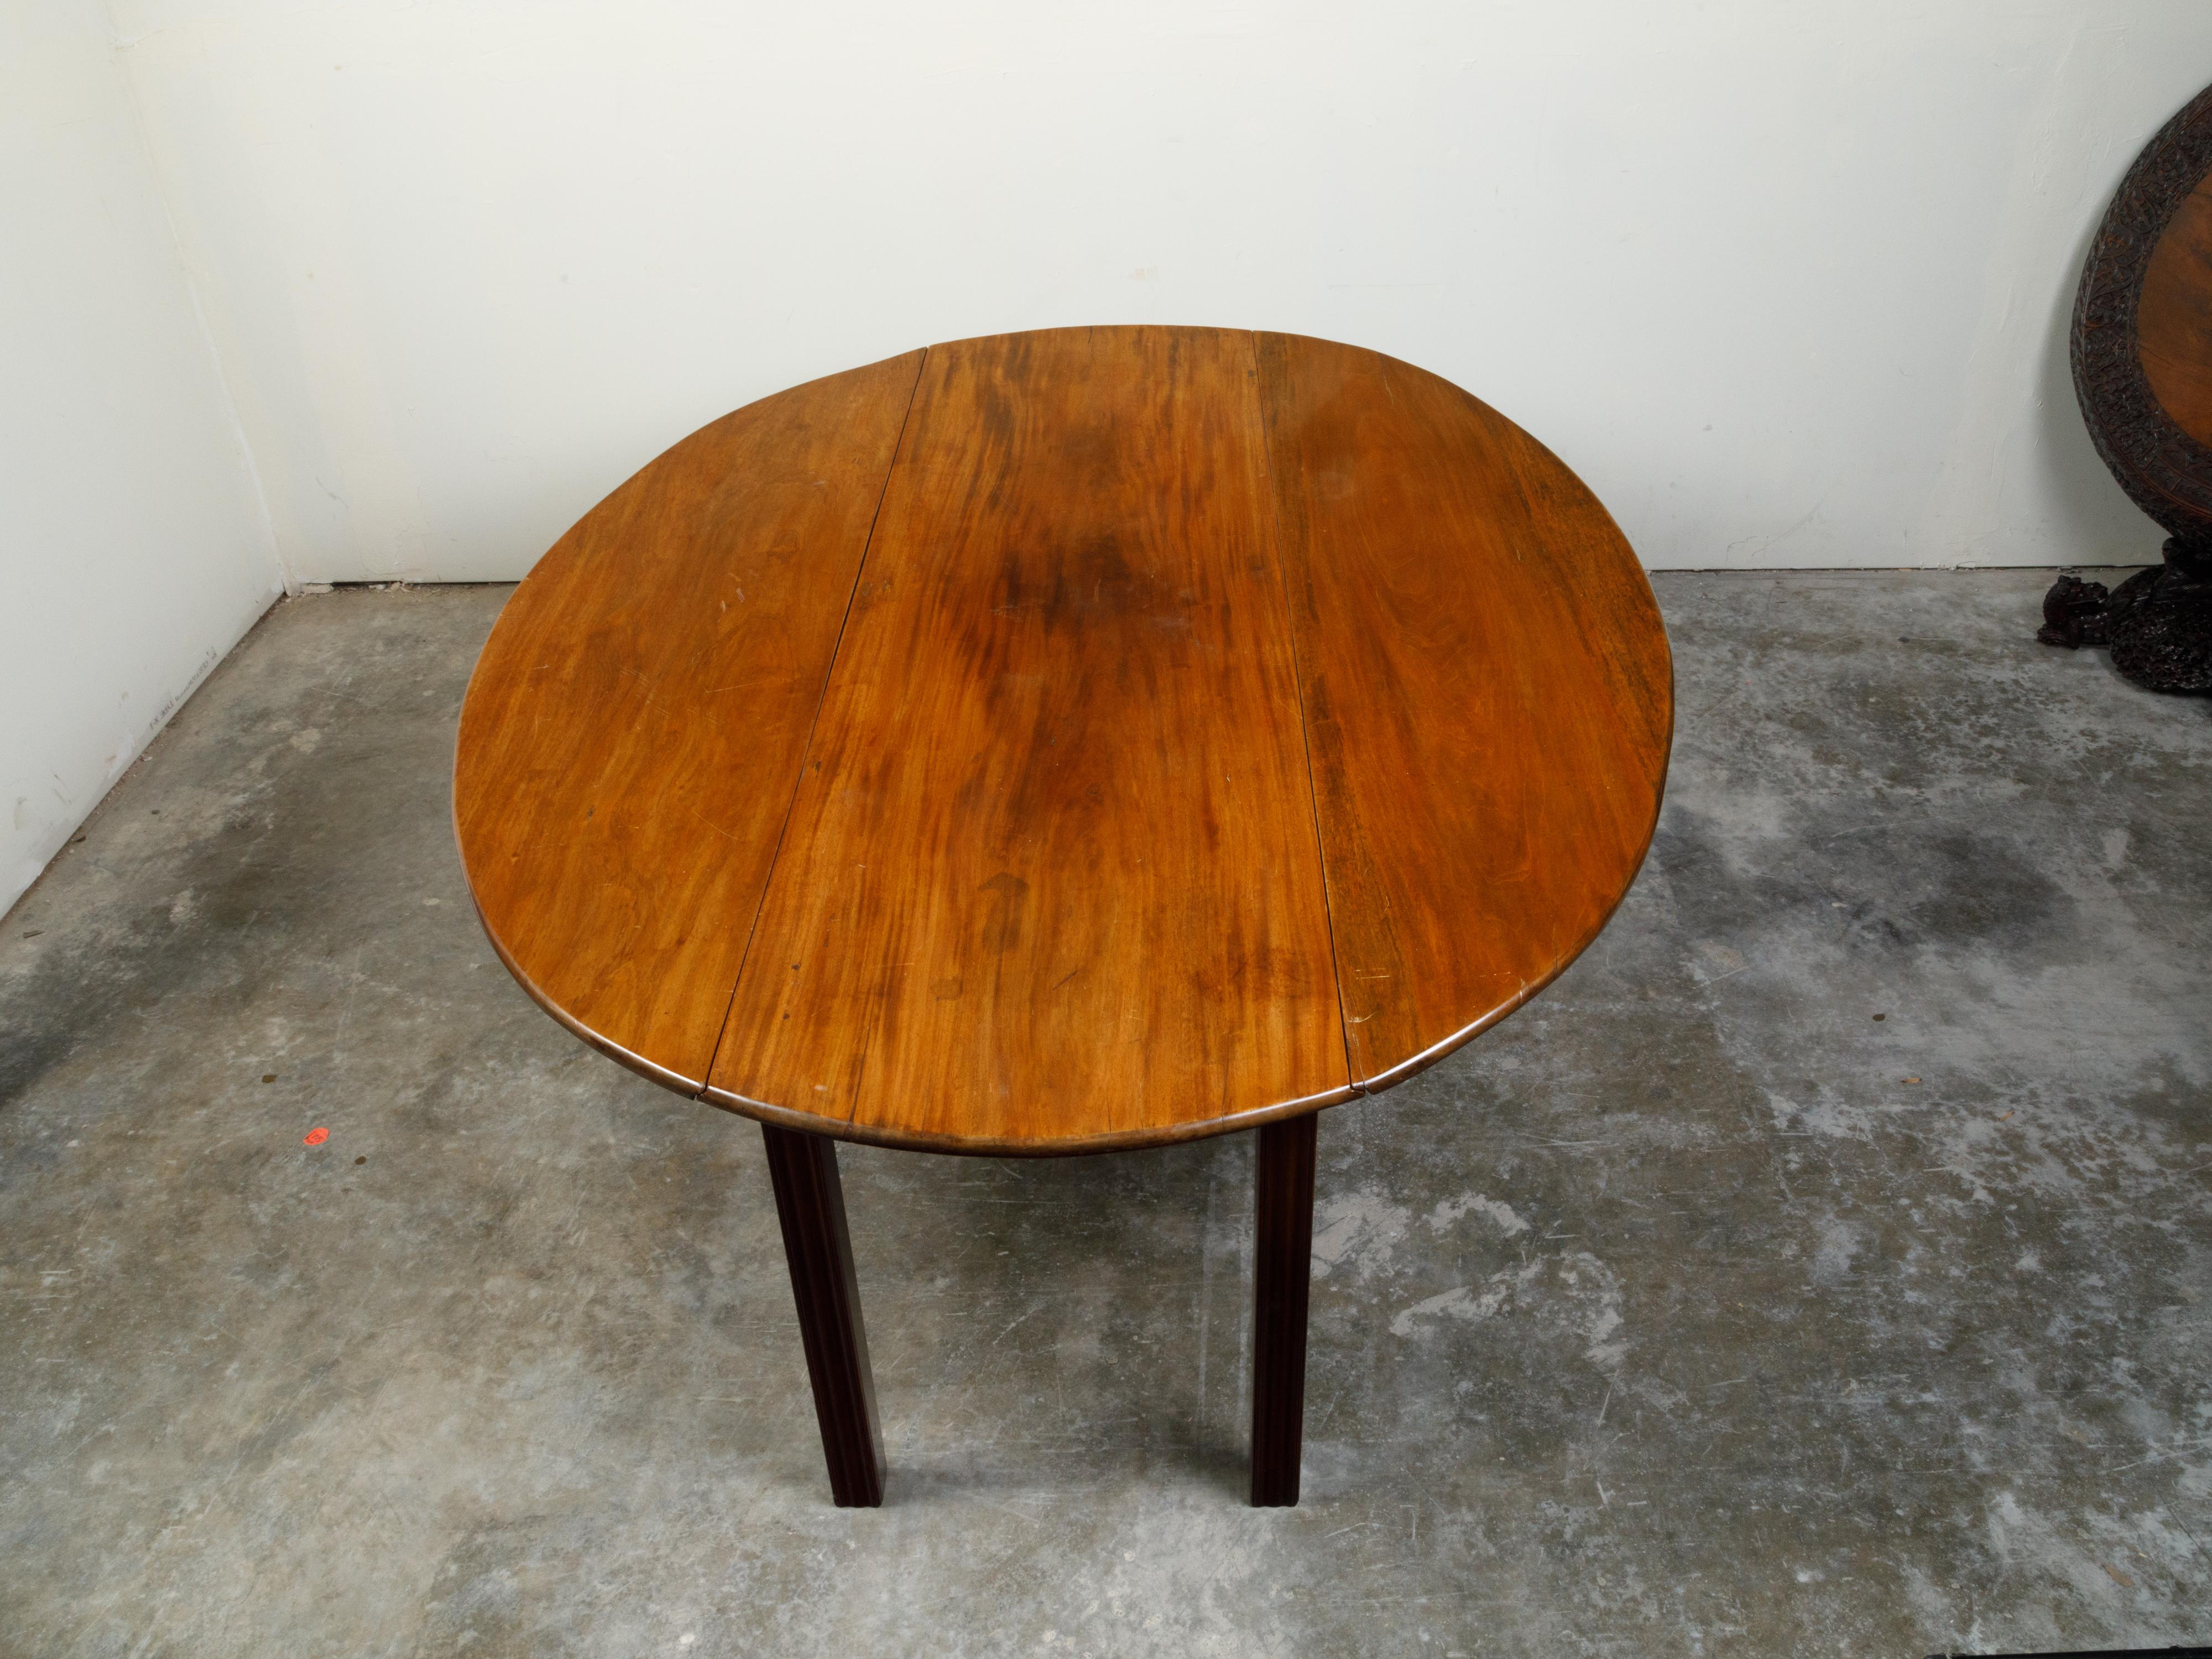 19th Century English Walnut Drop-Leaf Table with Oval Top and Straight Legs For Sale 2